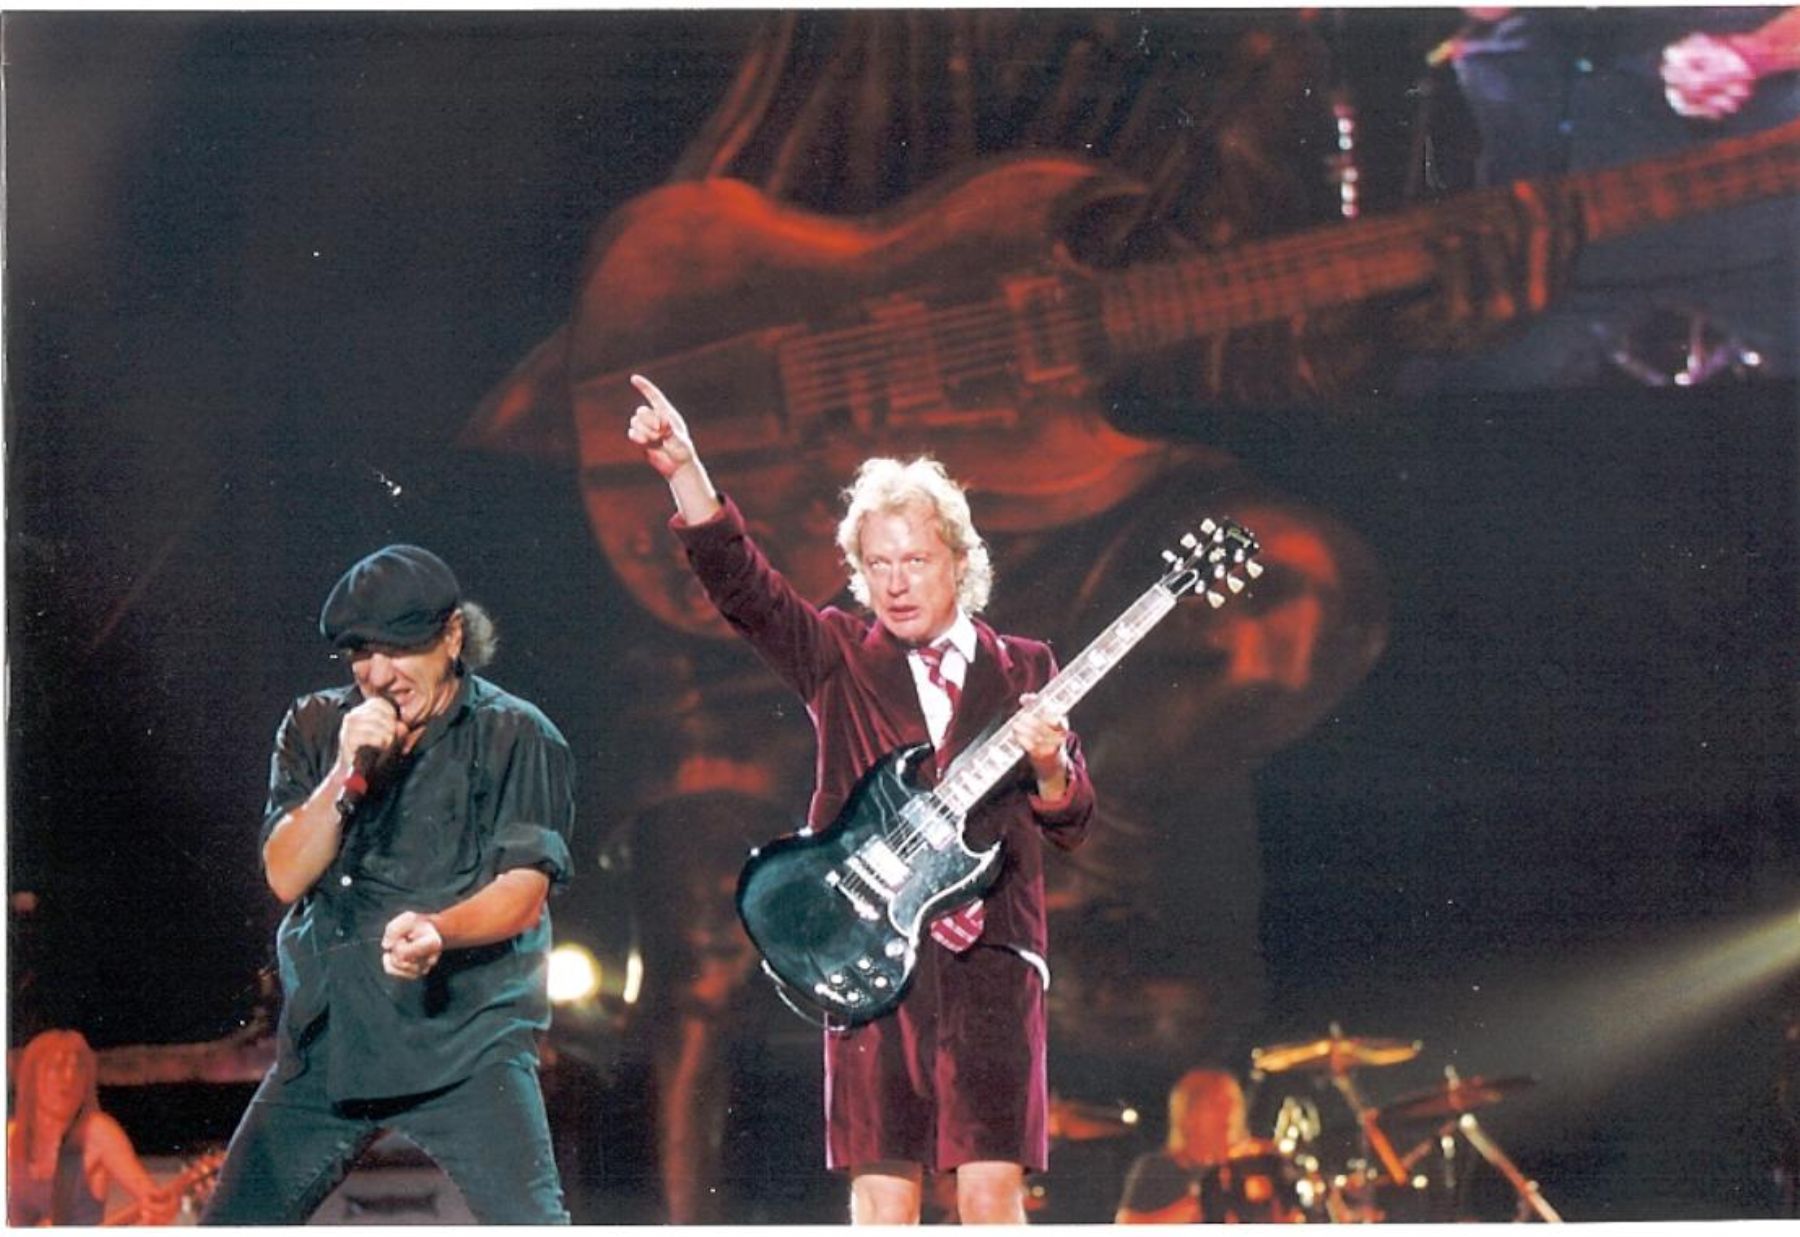 Australian hard rock band AC/DC may include Lima in their tour.